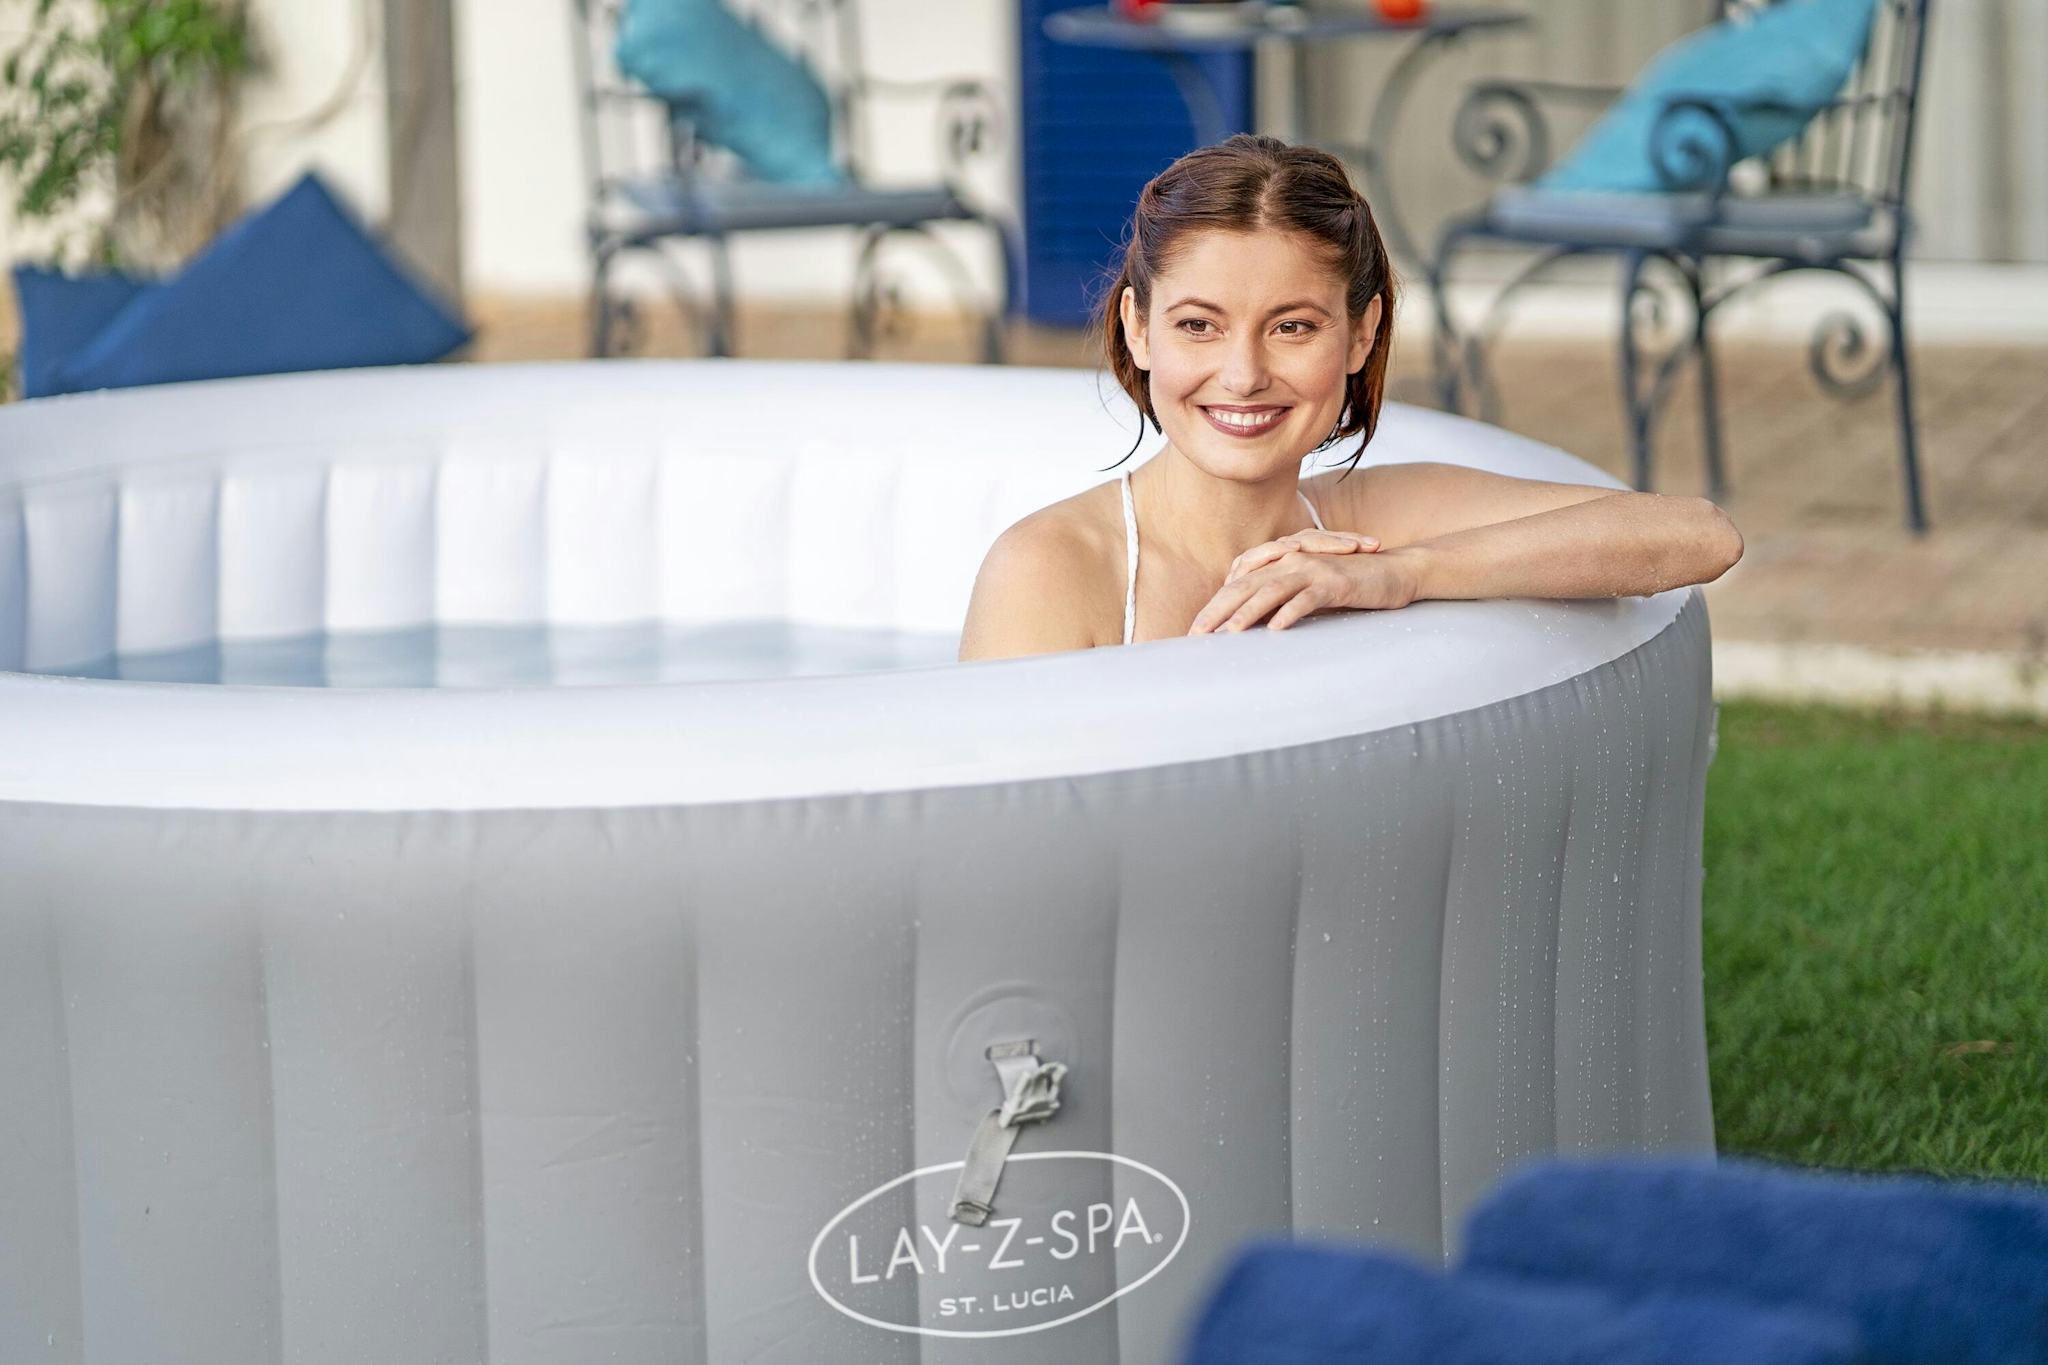 Spas Gonflables Spa gonflable rond St. Lucia AirJet™ Lay-Z-Spa®  2-3 personnes Bestway 10